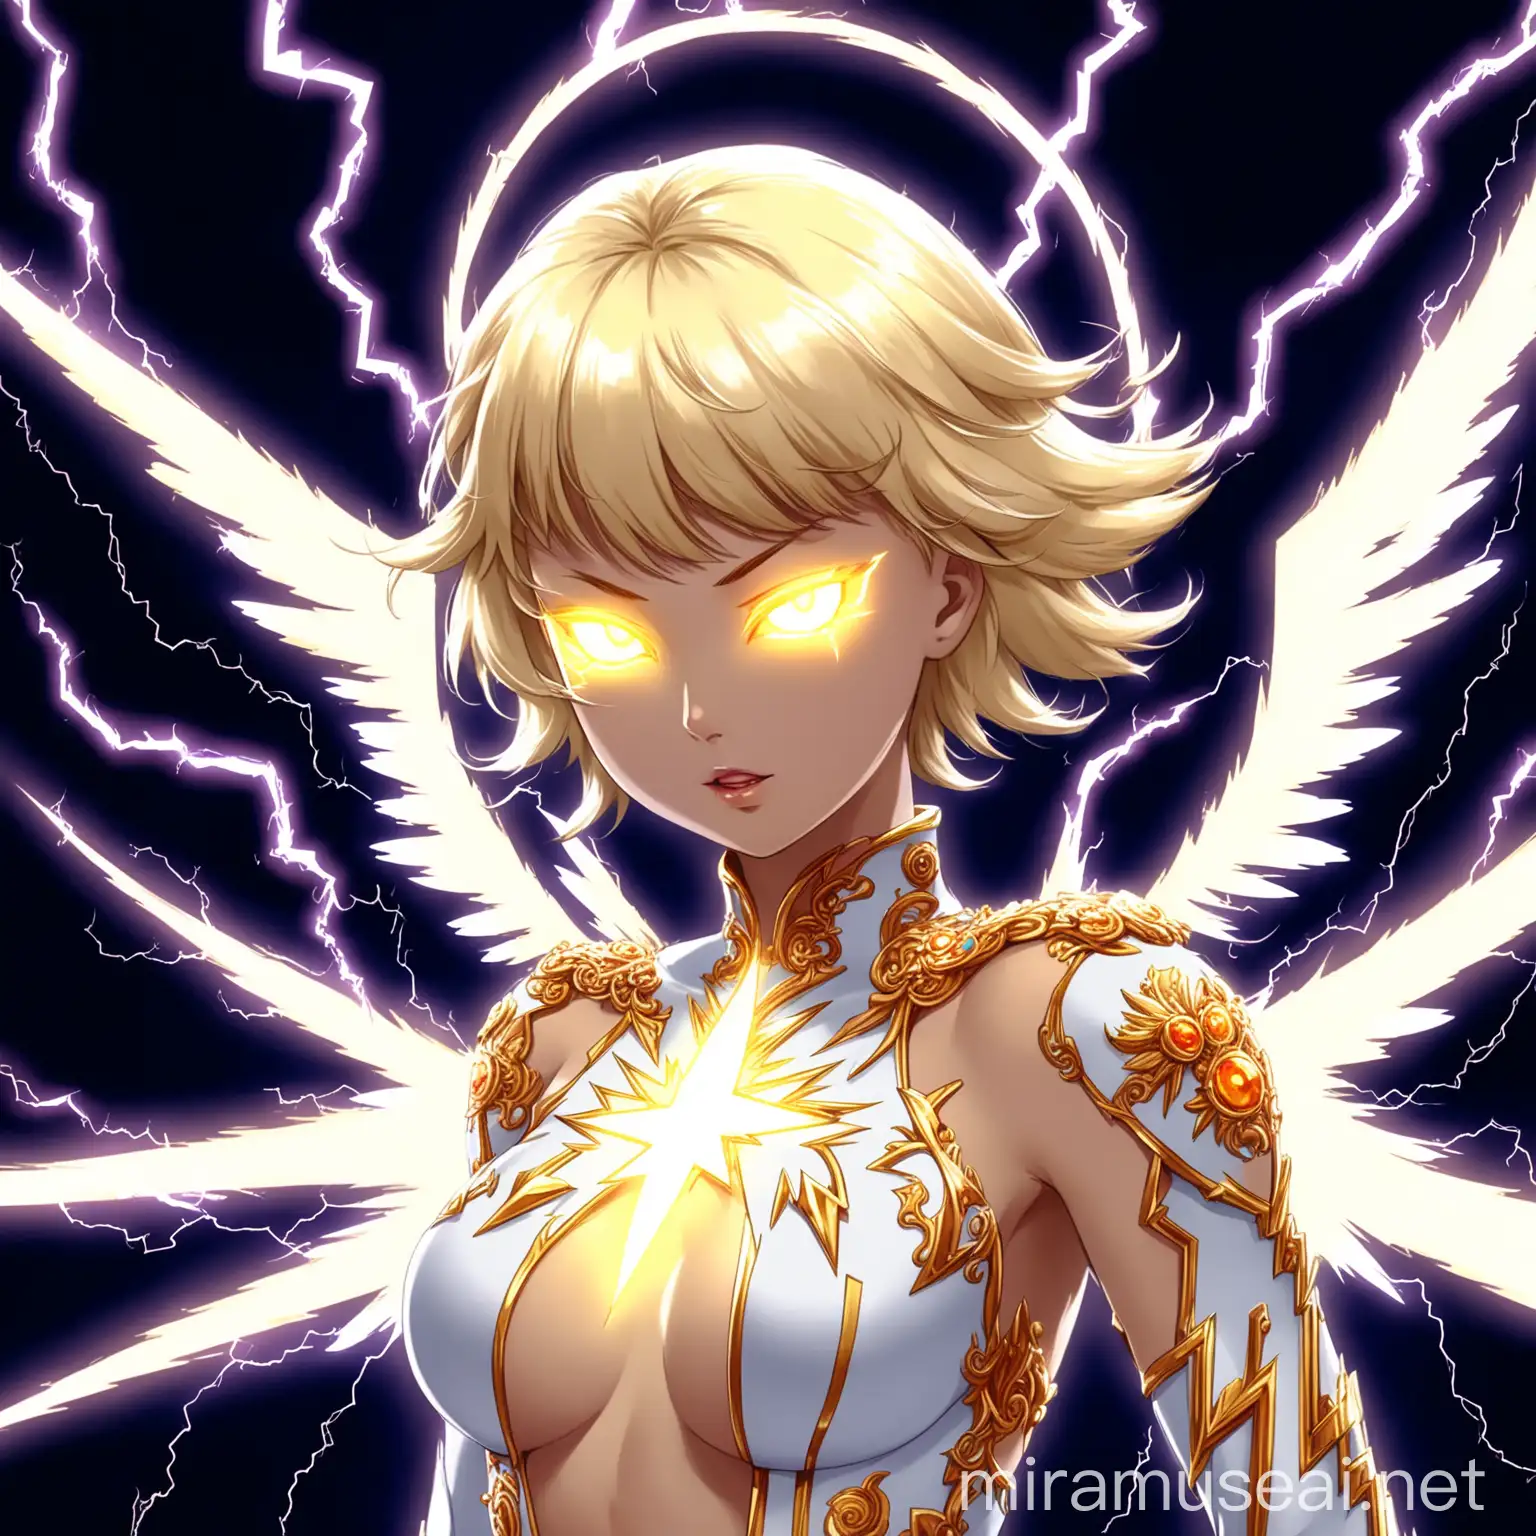 An (((angel woman))), she has radiant lightning wings, luxurious, she has a short wolfcut blonde hair, and a magnificent, luminous form, emitting an ethereal glow that highlights every intricate detail, she has a beautiful body with luminous signs of (((lightning bolt)))), from her flawless complexion to her electrifying, 'crazy' expression, luminous lightning eyes, in anime style